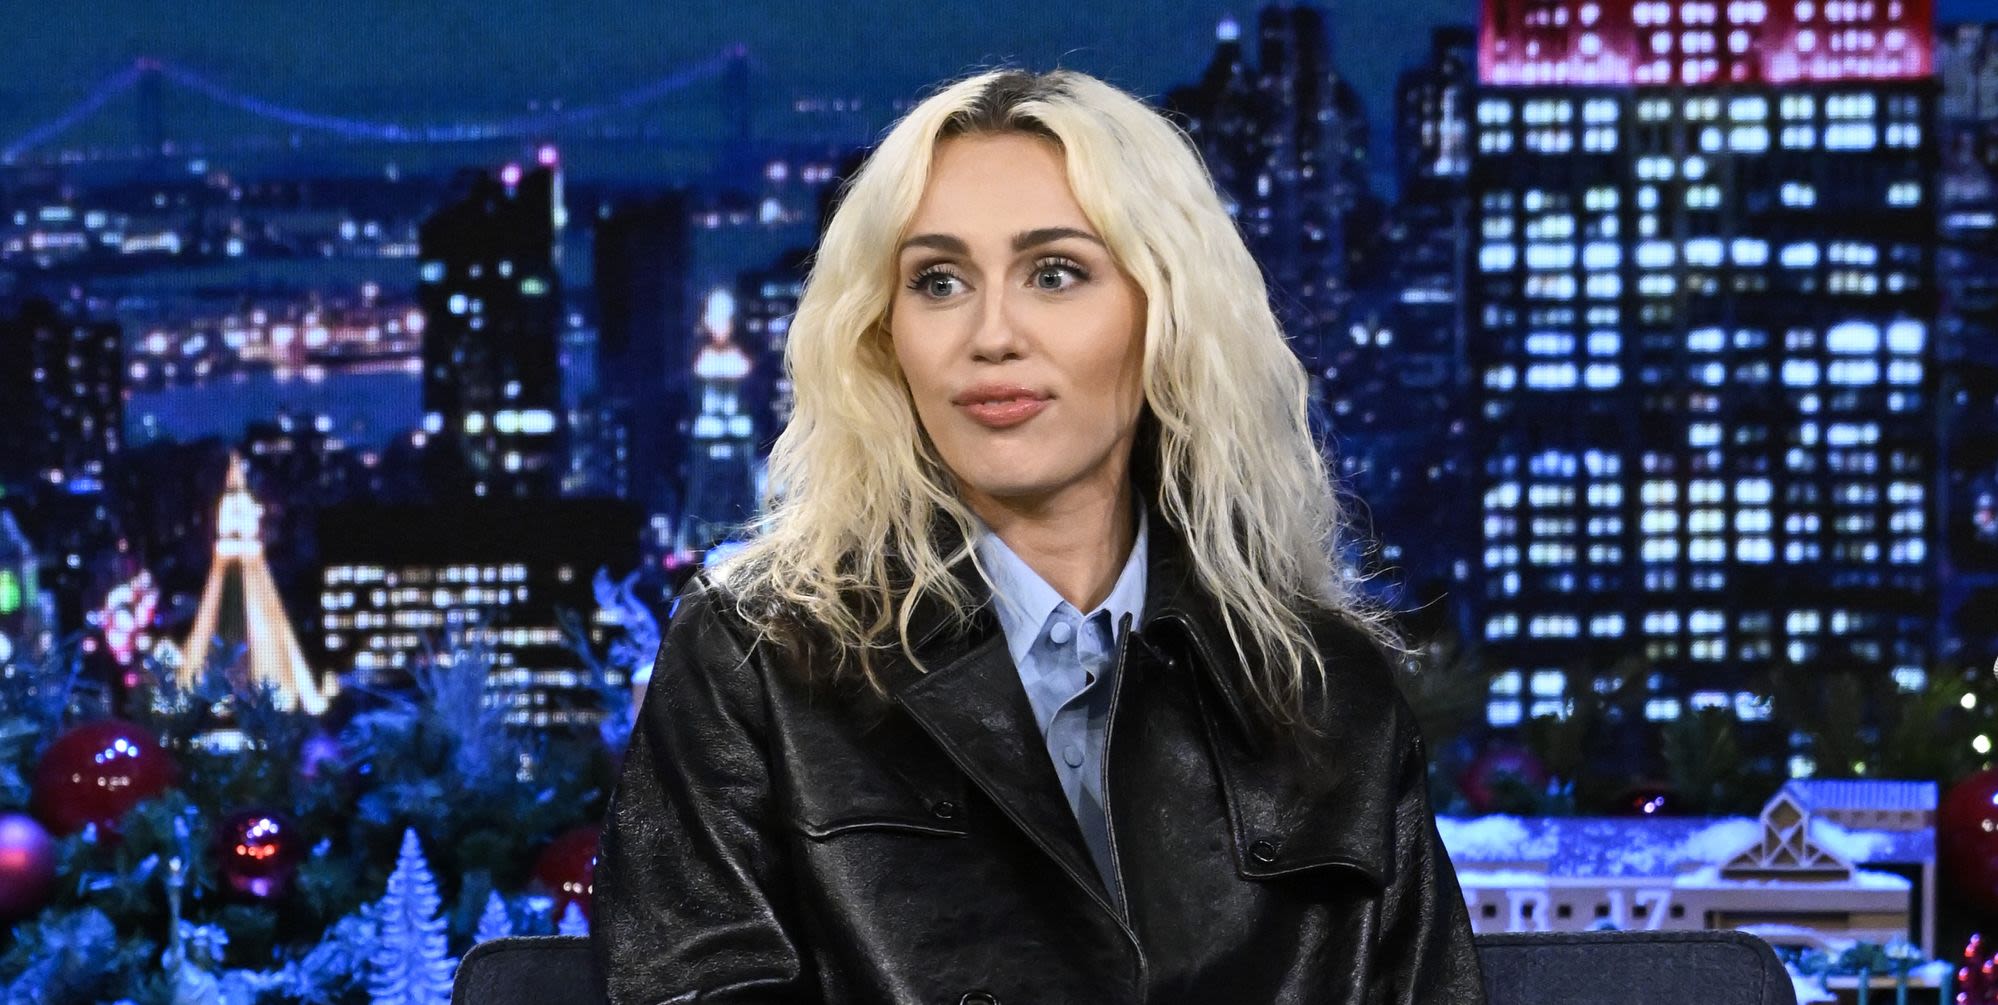 Miley Cyrus lines up special Netflix appearance